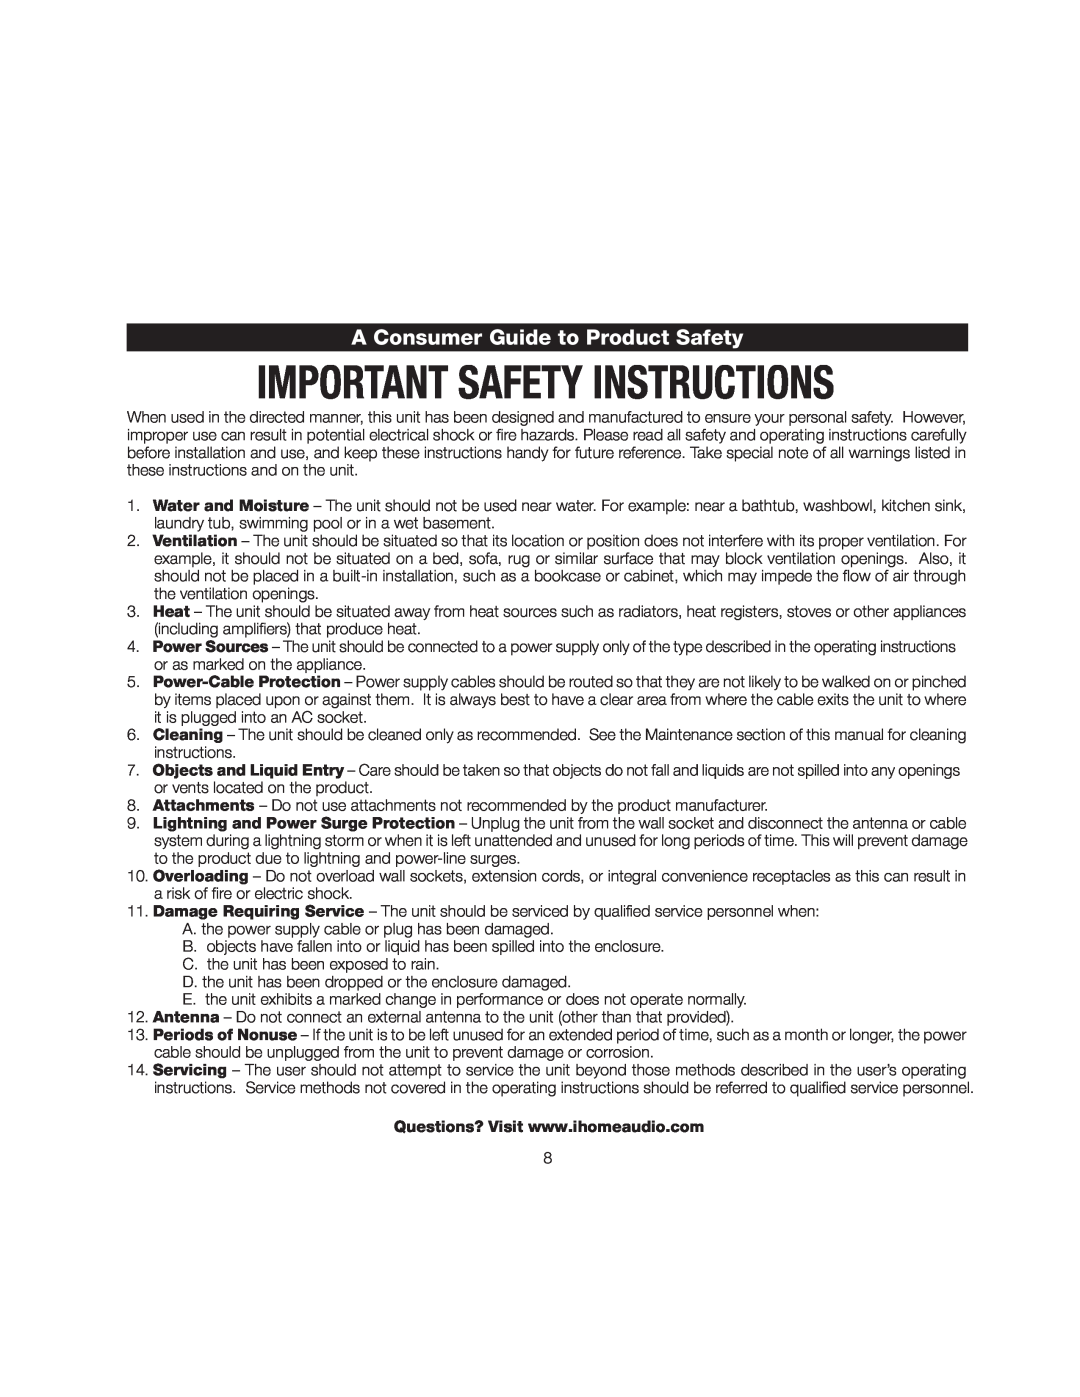 iHome iA17 instruction manual A Consumer Guide to Product Safety 